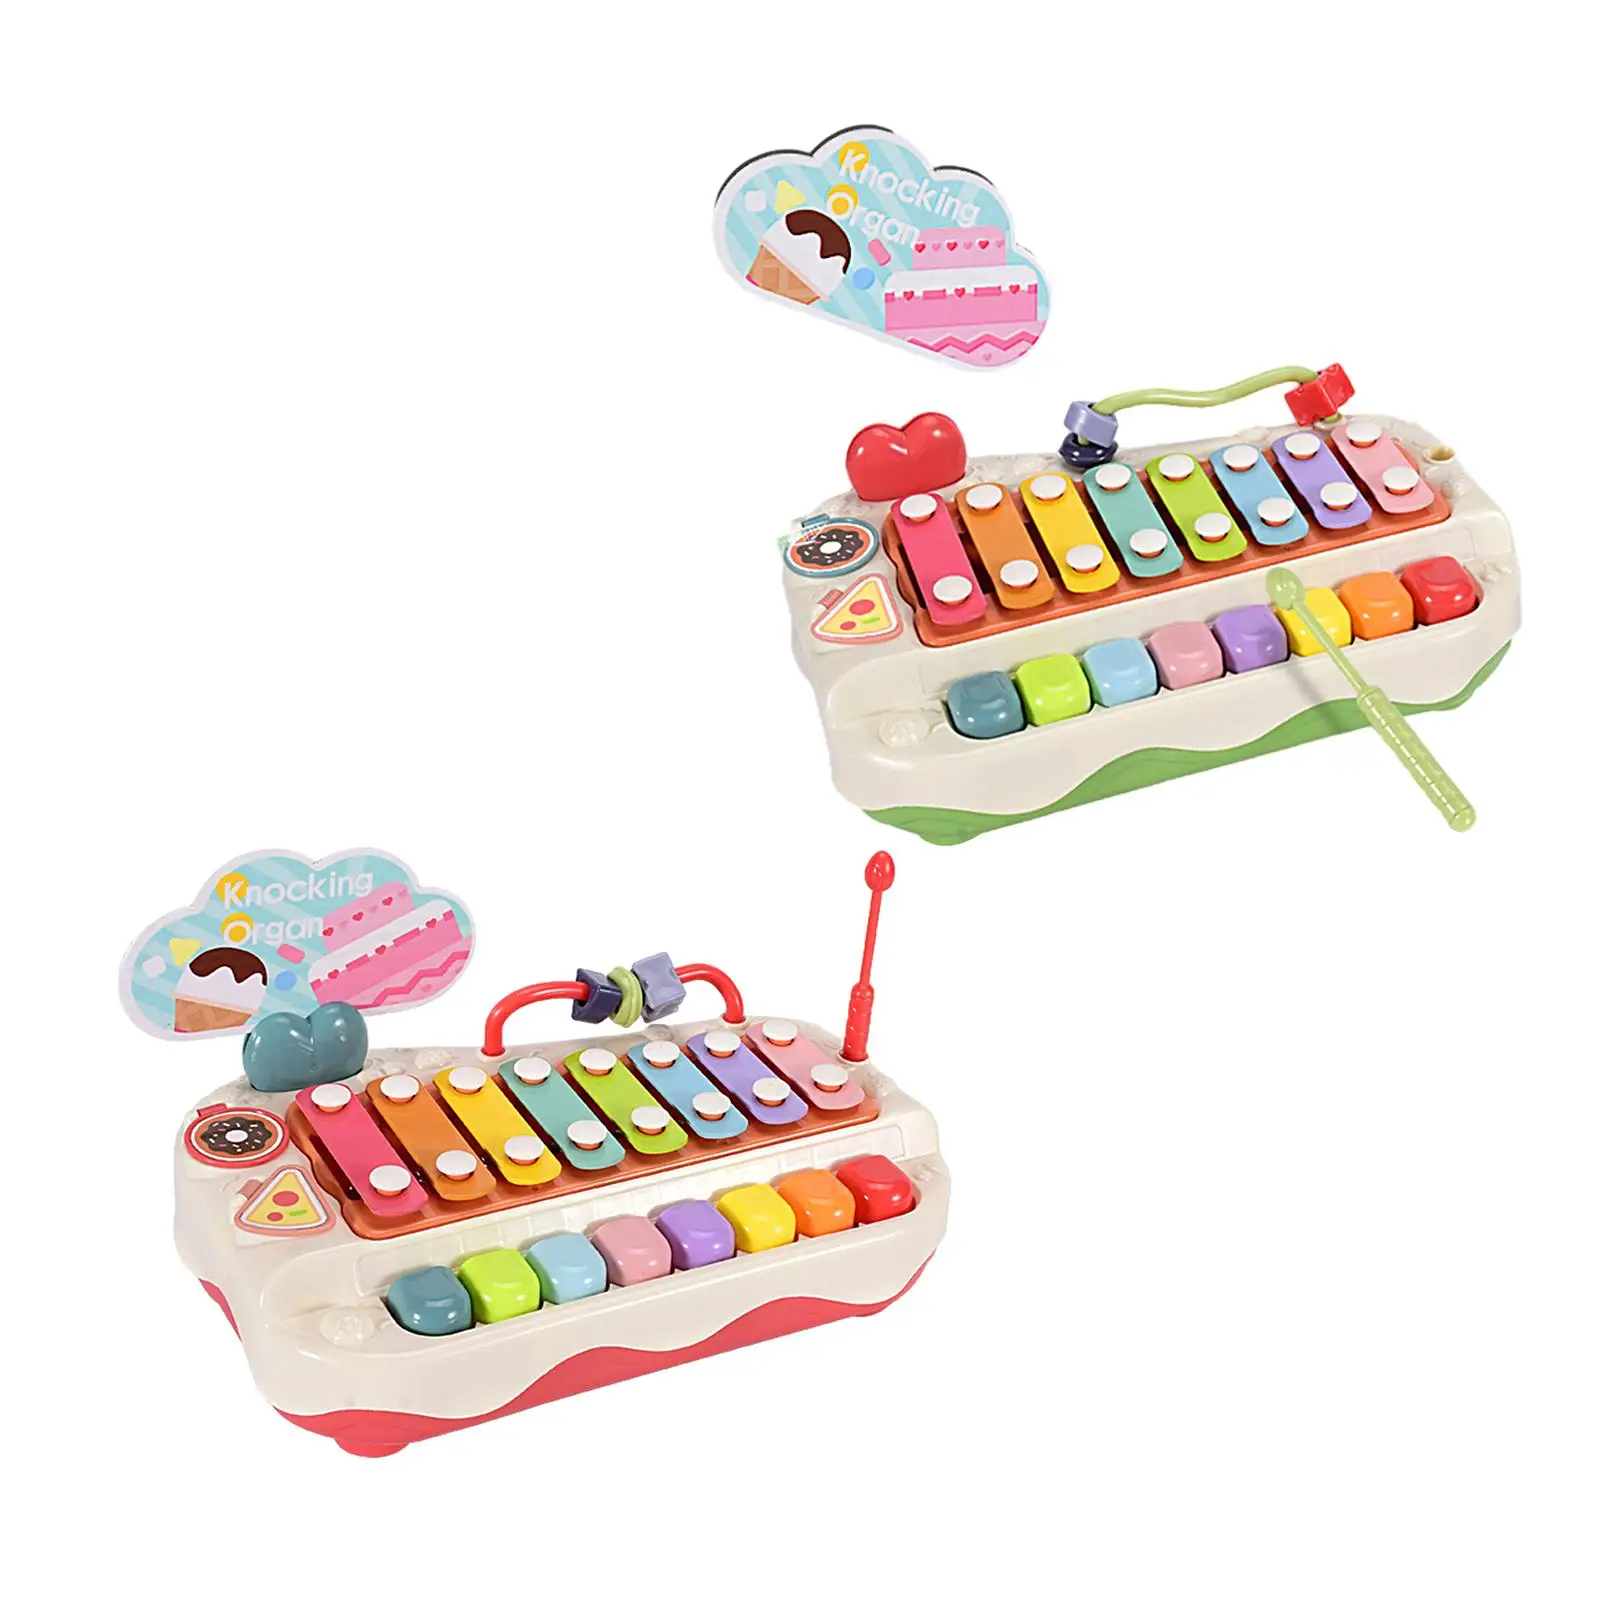 Kids Musical Toy Learning Toy Percussion Instrument Hammering Pounding Toys Piano Toy for Baby Toddler Kids 3+ Boy Girls Gifts